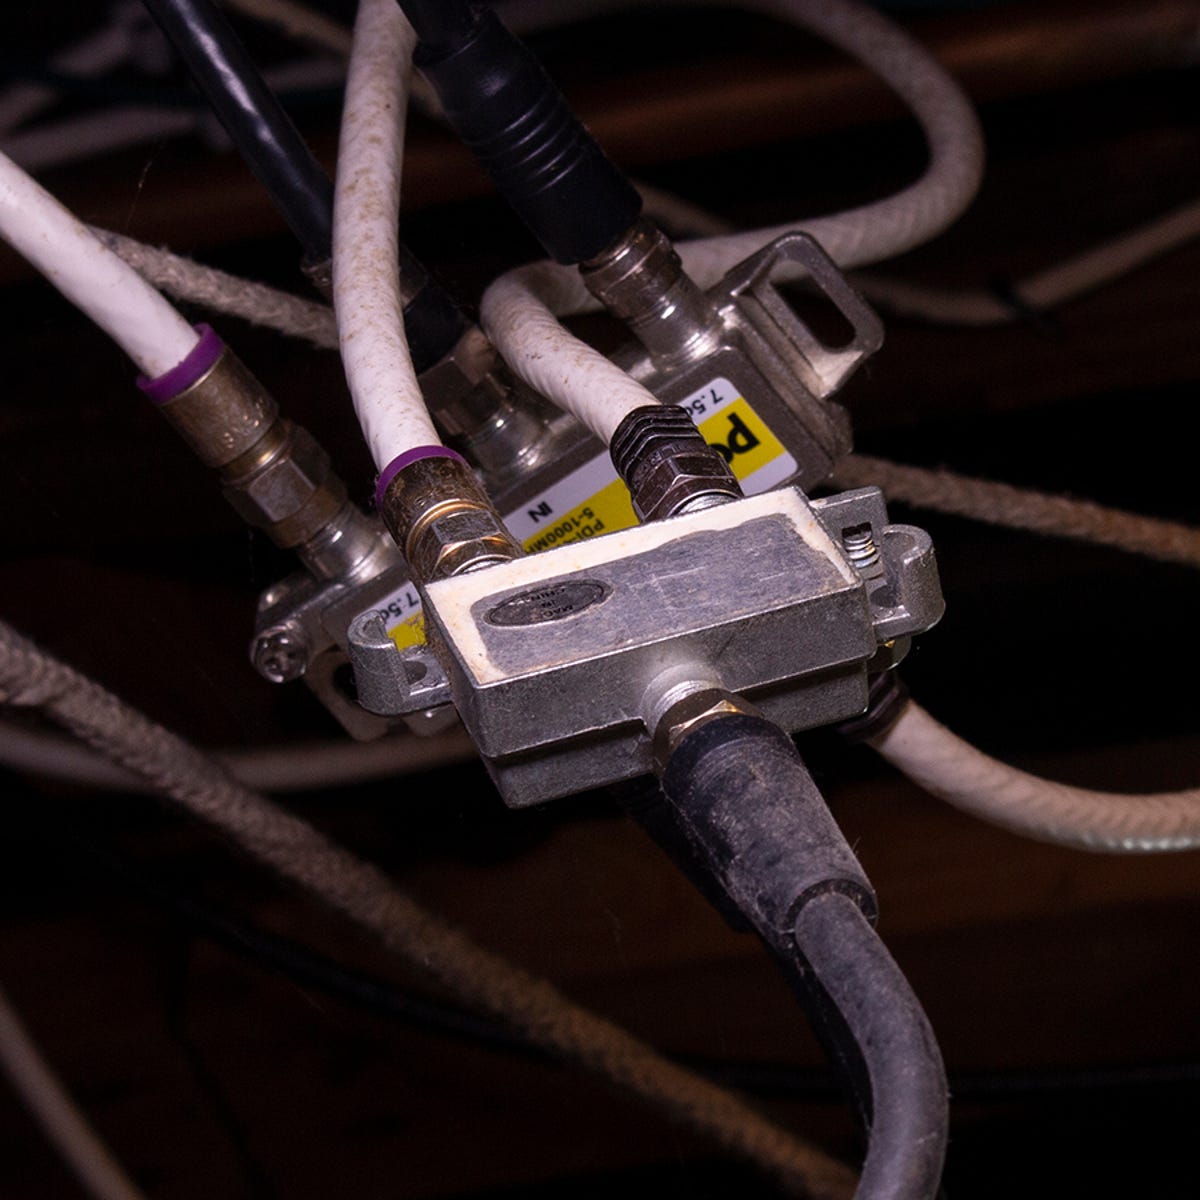 Ikke vigtigt Arthur Conan Doyle polet How to convert your home's old TV cable into powerful Ethernet lines | ZDNET